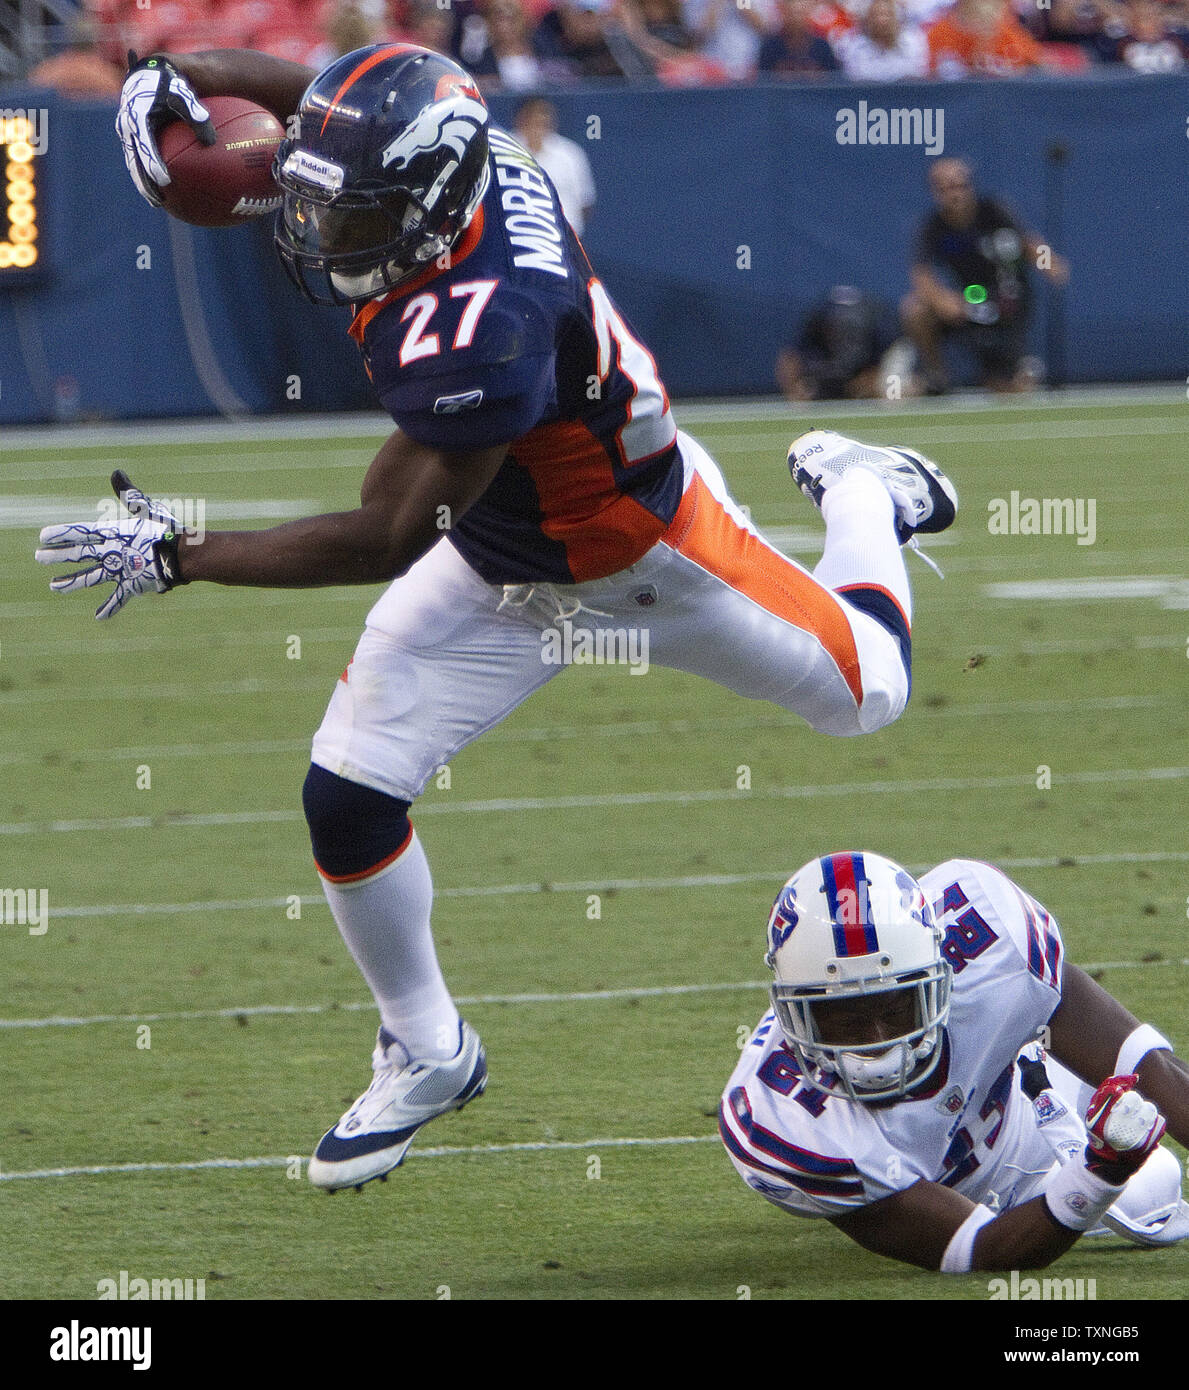 Buffalo Bills cornerback Leodis McKelvin (R) knocks Denver Broncos running back Knowshon Moreno (27) out of bounds during the first half at Sports Authority Field at Mile High in Denver on August 20, 2011.    UPI/Gary C. Caskey Stock Photo